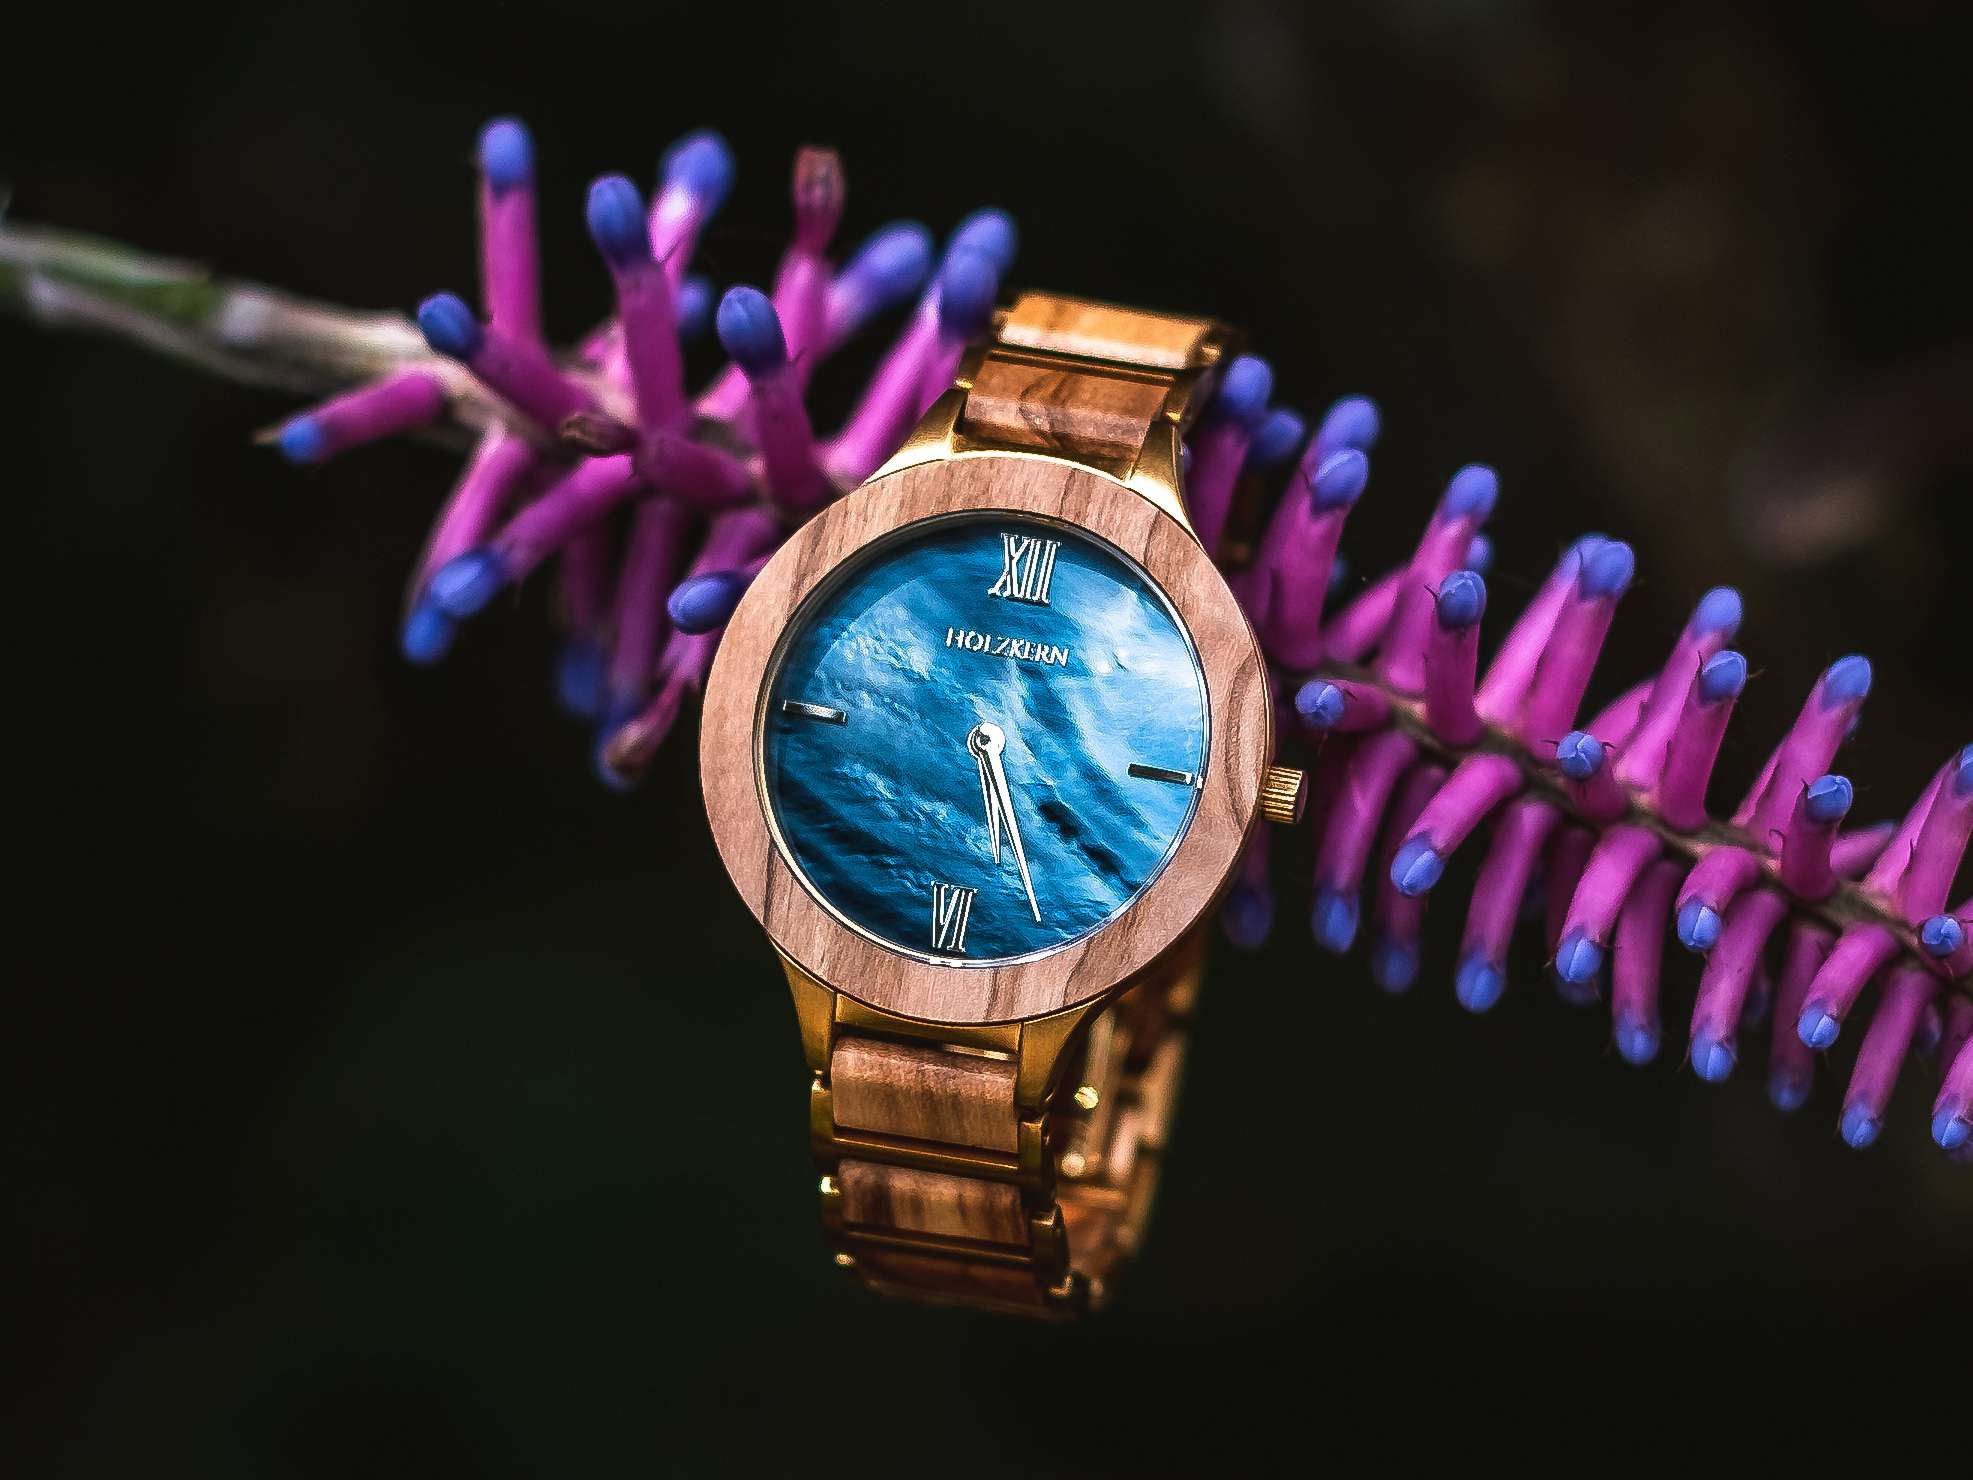 Taboola Ad Example 59784 - Made Of Wood & Stone, Is It True That Holzkern Makes The Most Unique Watches?